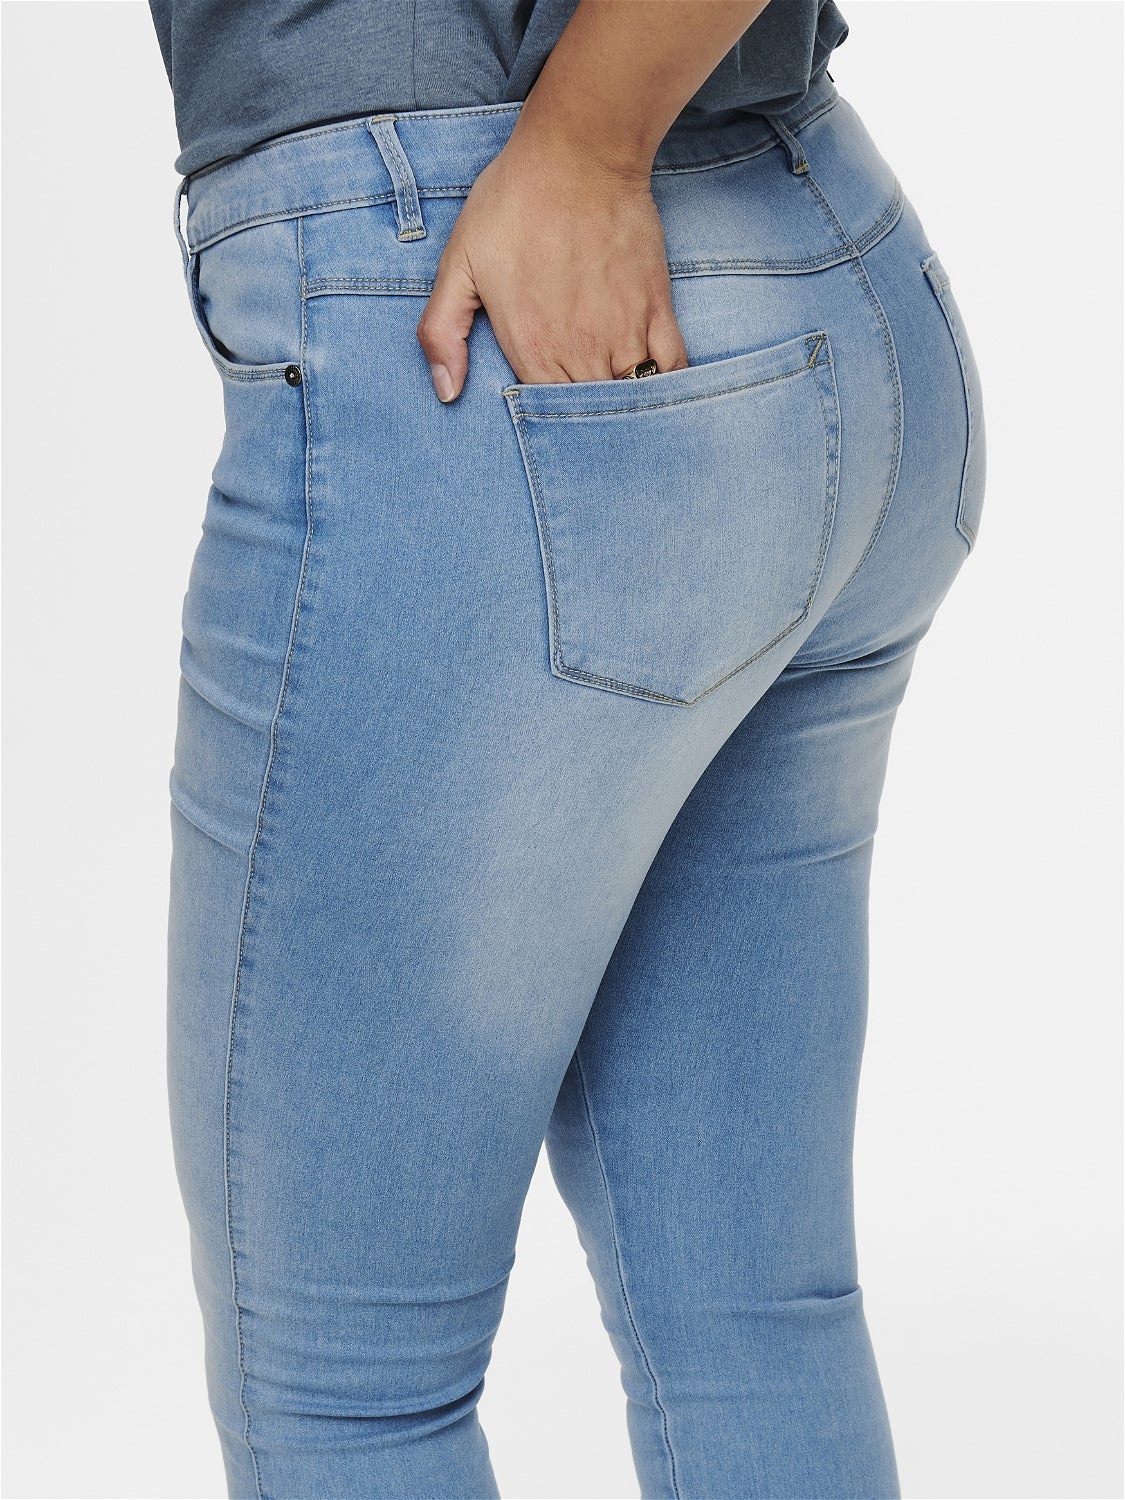 Skinny hw CarAugusta jeans fit | Curvy Light Blue ONLY® |